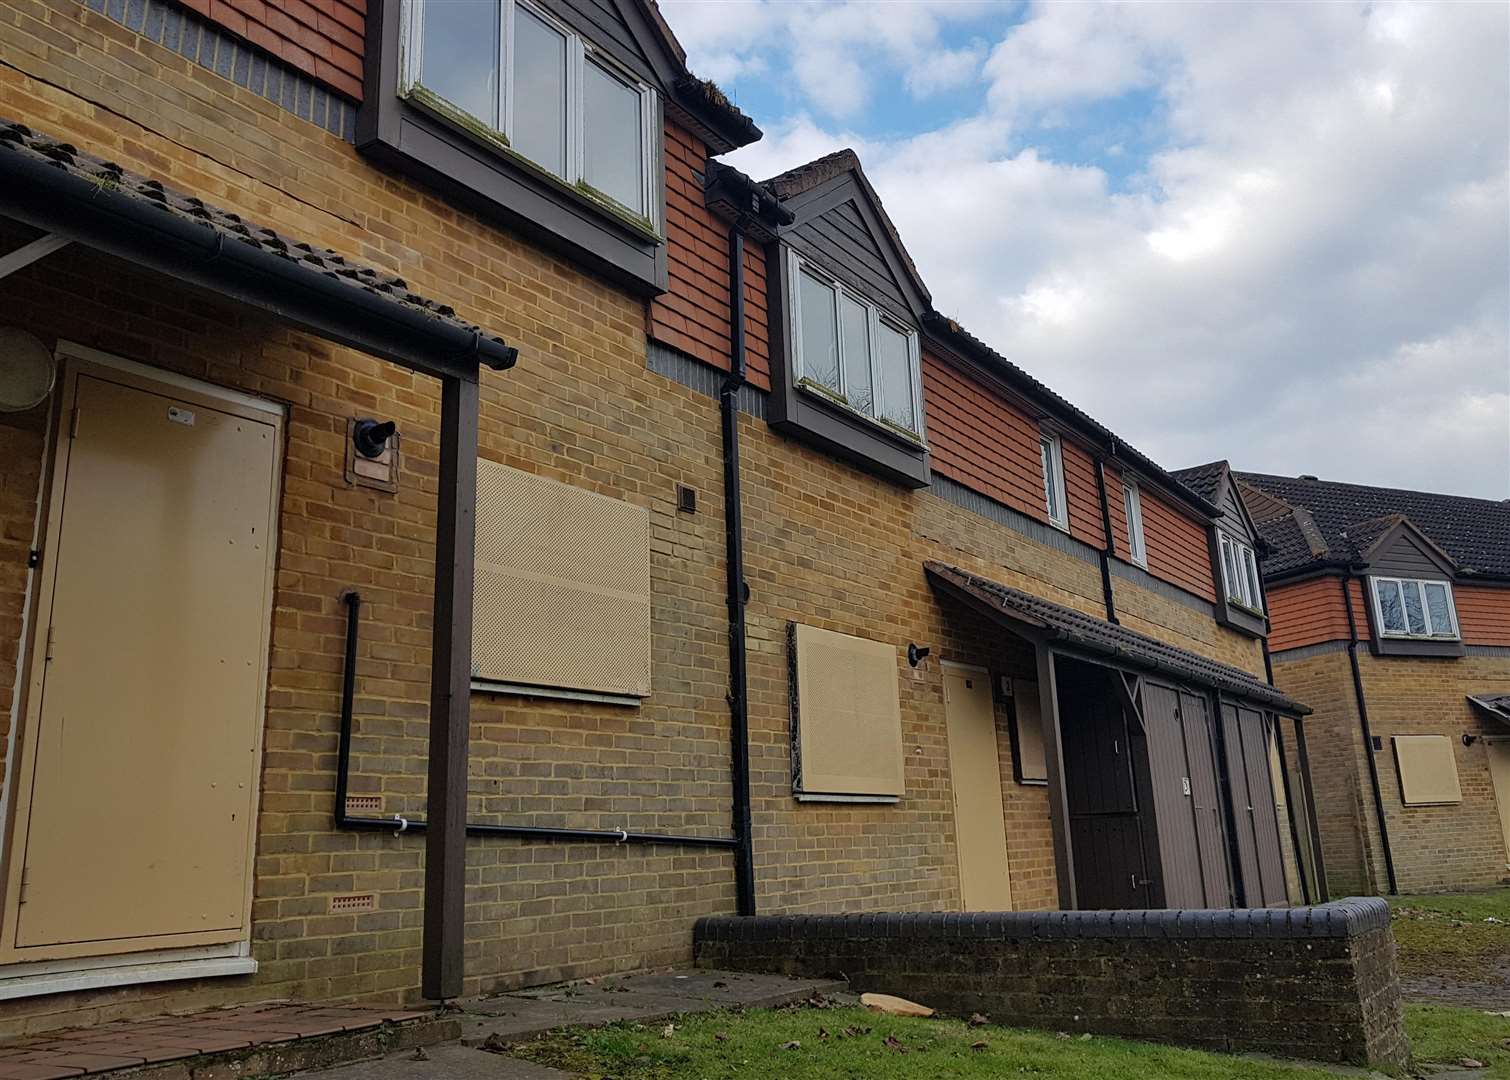 Empty homes across the county have sparked anger from campaigners